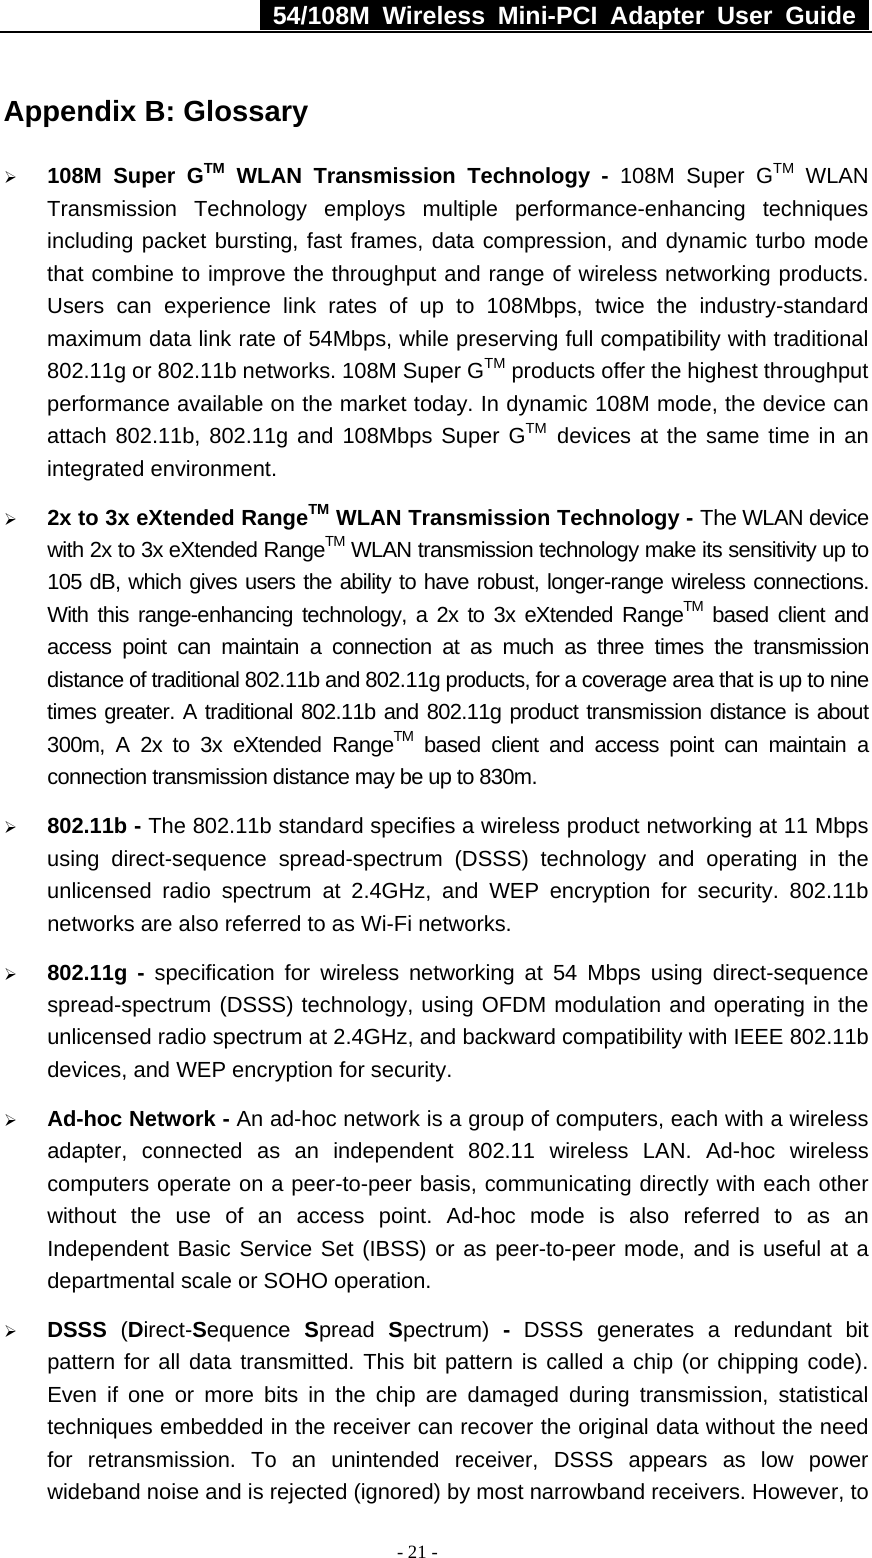   54/108M Wireless Mini-PCI Adapter User Guide  - 21 - Appendix B: Glossary ¾ 108M Super GTM WLAN Transmission Technology - 108M Super GTM WLAN Transmission Technology employs multiple performance-enhancing techniques including packet bursting, fast frames, data compression, and dynamic turbo mode that combine to improve the throughput and range of wireless networking products. Users can experience link rates of up to 108Mbps, twice the industry-standard maximum data link rate of 54Mbps, while preserving full compatibility with traditional 802.11g or 802.11b networks. 108M Super GTM products offer the highest throughput performance available on the market today. In dynamic 108M mode, the device can attach 802.11b, 802.11g and 108Mbps Super GTM devices at the same time in an integrated environment. ¾ 2x to 3x eXtended RangeTM WLAN Transmission Technology - The WLAN device with 2x to 3x eXtended RangeTM WLAN transmission technology make its sensitivity up to 105 dB, which gives users the ability to have robust, longer-range wireless connections. With this range-enhancing technology, a 2x to 3x eXtended RangeTM based client and access point can maintain a connection at as much as three times the transmission distance of traditional 802.11b and 802.11g products, for a coverage area that is up to nine times greater. A traditional 802.11b and 802.11g product transmission distance is about 300m, A 2x to 3x eXtended RangeTM based client and access point can maintain a connection transmission distance may be up to 830m. ¾ 802.11b - The 802.11b standard specifies a wireless product networking at 11 Mbps using direct-sequence spread-spectrum (DSSS) technology and operating in the unlicensed radio spectrum at 2.4GHz, and WEP encryption for security. 802.11b networks are also referred to as Wi-Fi networks. ¾ 802.11g - specification for wireless networking at 54 Mbps using direct-sequence spread-spectrum (DSSS) technology, using OFDM modulation and operating in the unlicensed radio spectrum at 2.4GHz, and backward compatibility with IEEE 802.11b devices, and WEP encryption for security. ¾ Ad-hoc Network - An ad-hoc network is a group of computers, each with a wireless adapter, connected as an independent 802.11 wireless LAN. Ad-hoc wireless computers operate on a peer-to-peer basis, communicating directly with each other without the use of an access point. Ad-hoc mode is also referred to as an Independent Basic Service Set (IBSS) or as peer-to-peer mode, and is useful at a departmental scale or SOHO operation.   ¾ DSSS  (Direct-Sequence  Spread  Spectrum)  - DSSS generates a redundant bit pattern for all data transmitted. This bit pattern is called a chip (or chipping code). Even if one or more bits in the chip are damaged during transmission, statistical techniques embedded in the receiver can recover the original data without the need for retransmission. To an unintended receiver, DSSS appears as low power wideband noise and is rejected (ignored) by most narrowband receivers. However, to 